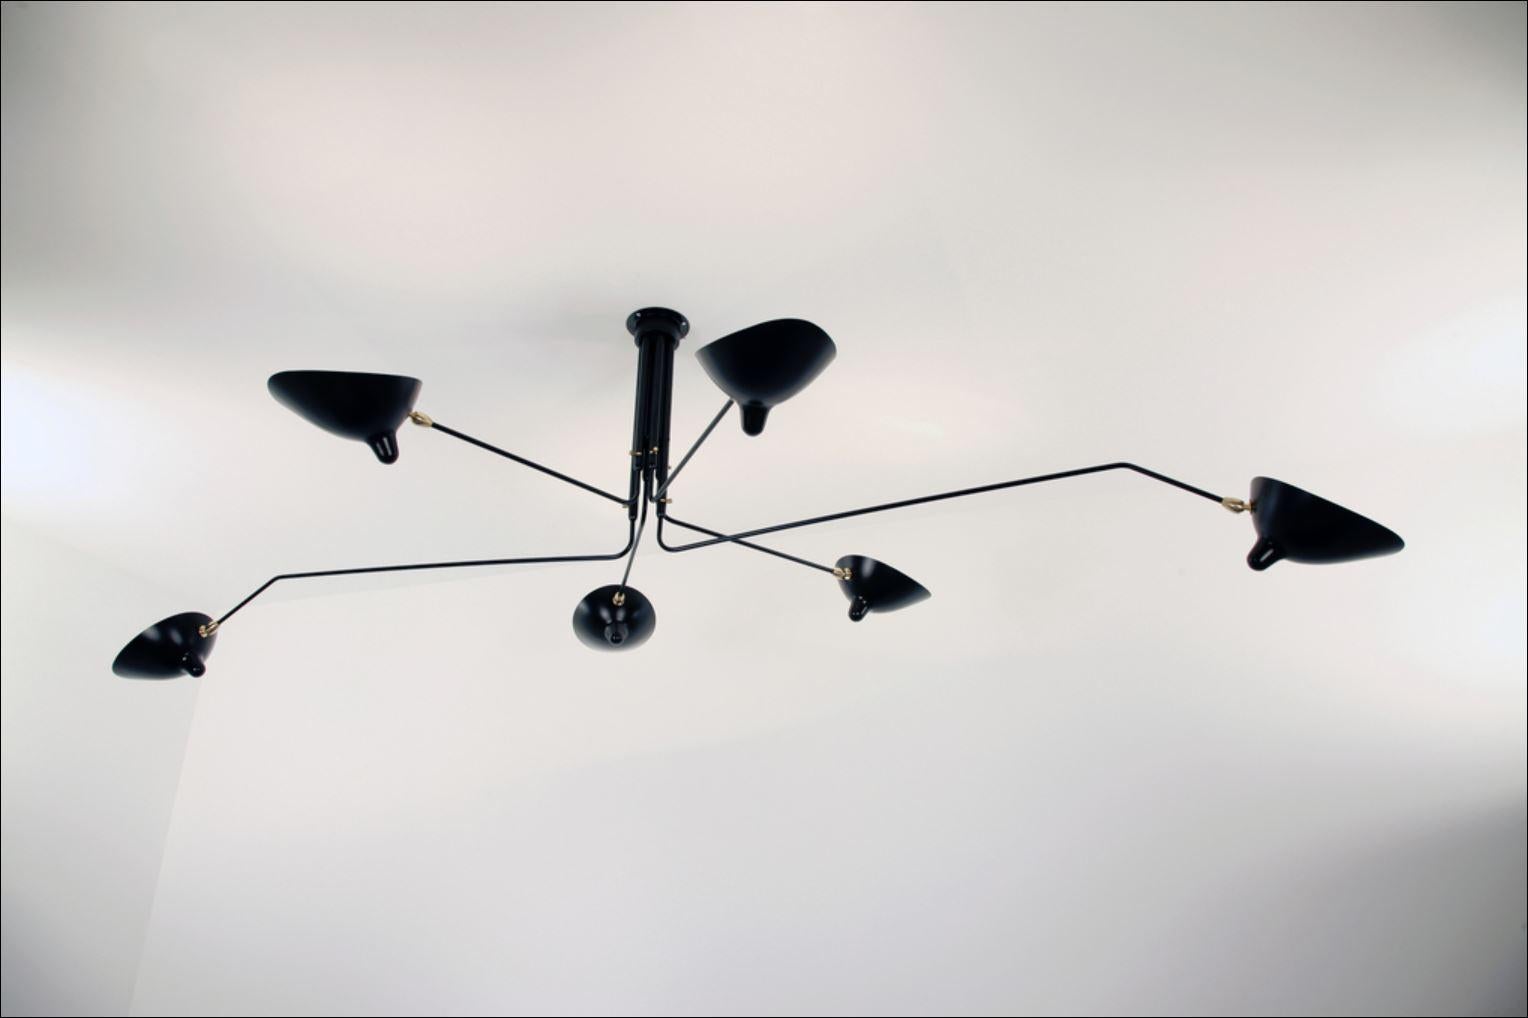 Impressively large, this six arm ceiling lamp is a Mouille classic. Tilting and rotating heads with rotating arms of 31 and 54 inches make this fixture a truly spectacular statement in a large room.

Available in black, white or both. Brass swivels